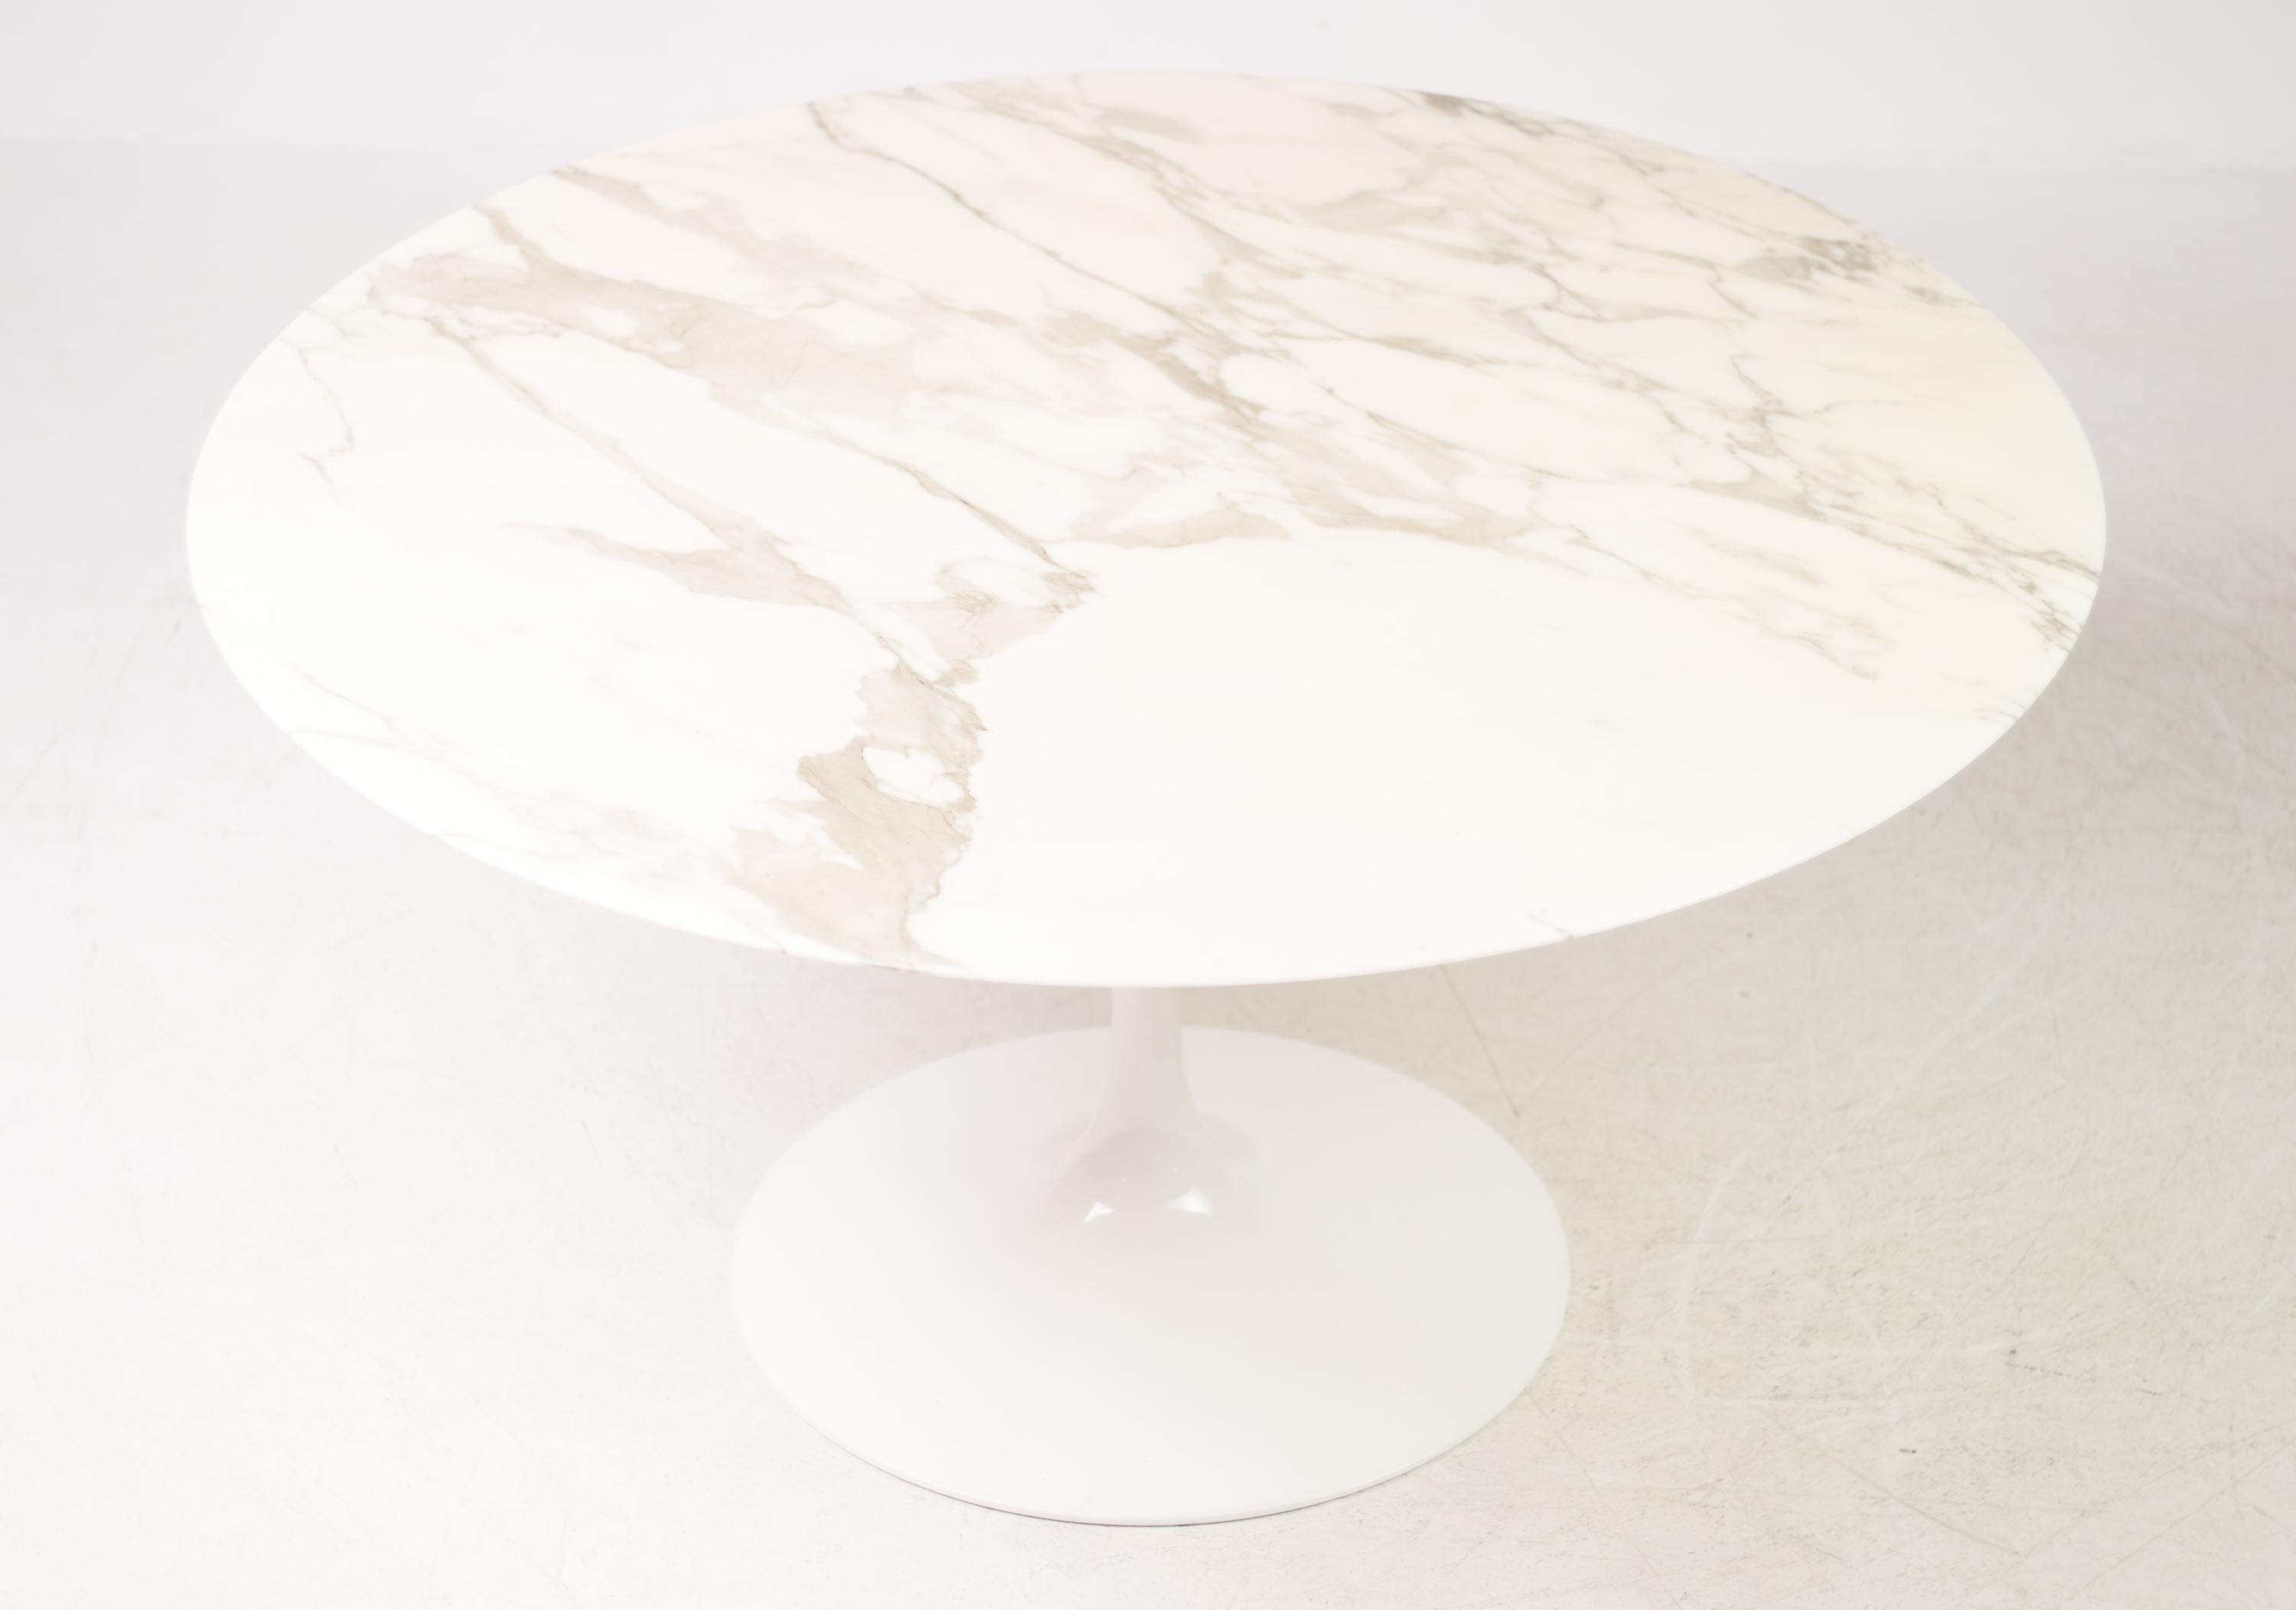 Classic tulip dining table designed by Eero Saarinen for Knoll International in the most desirable Calacatta marble.
A defining accomplishment of modern design and a timeless addition to your home—a true Classic.
Logo embossed in pedestal bottom.